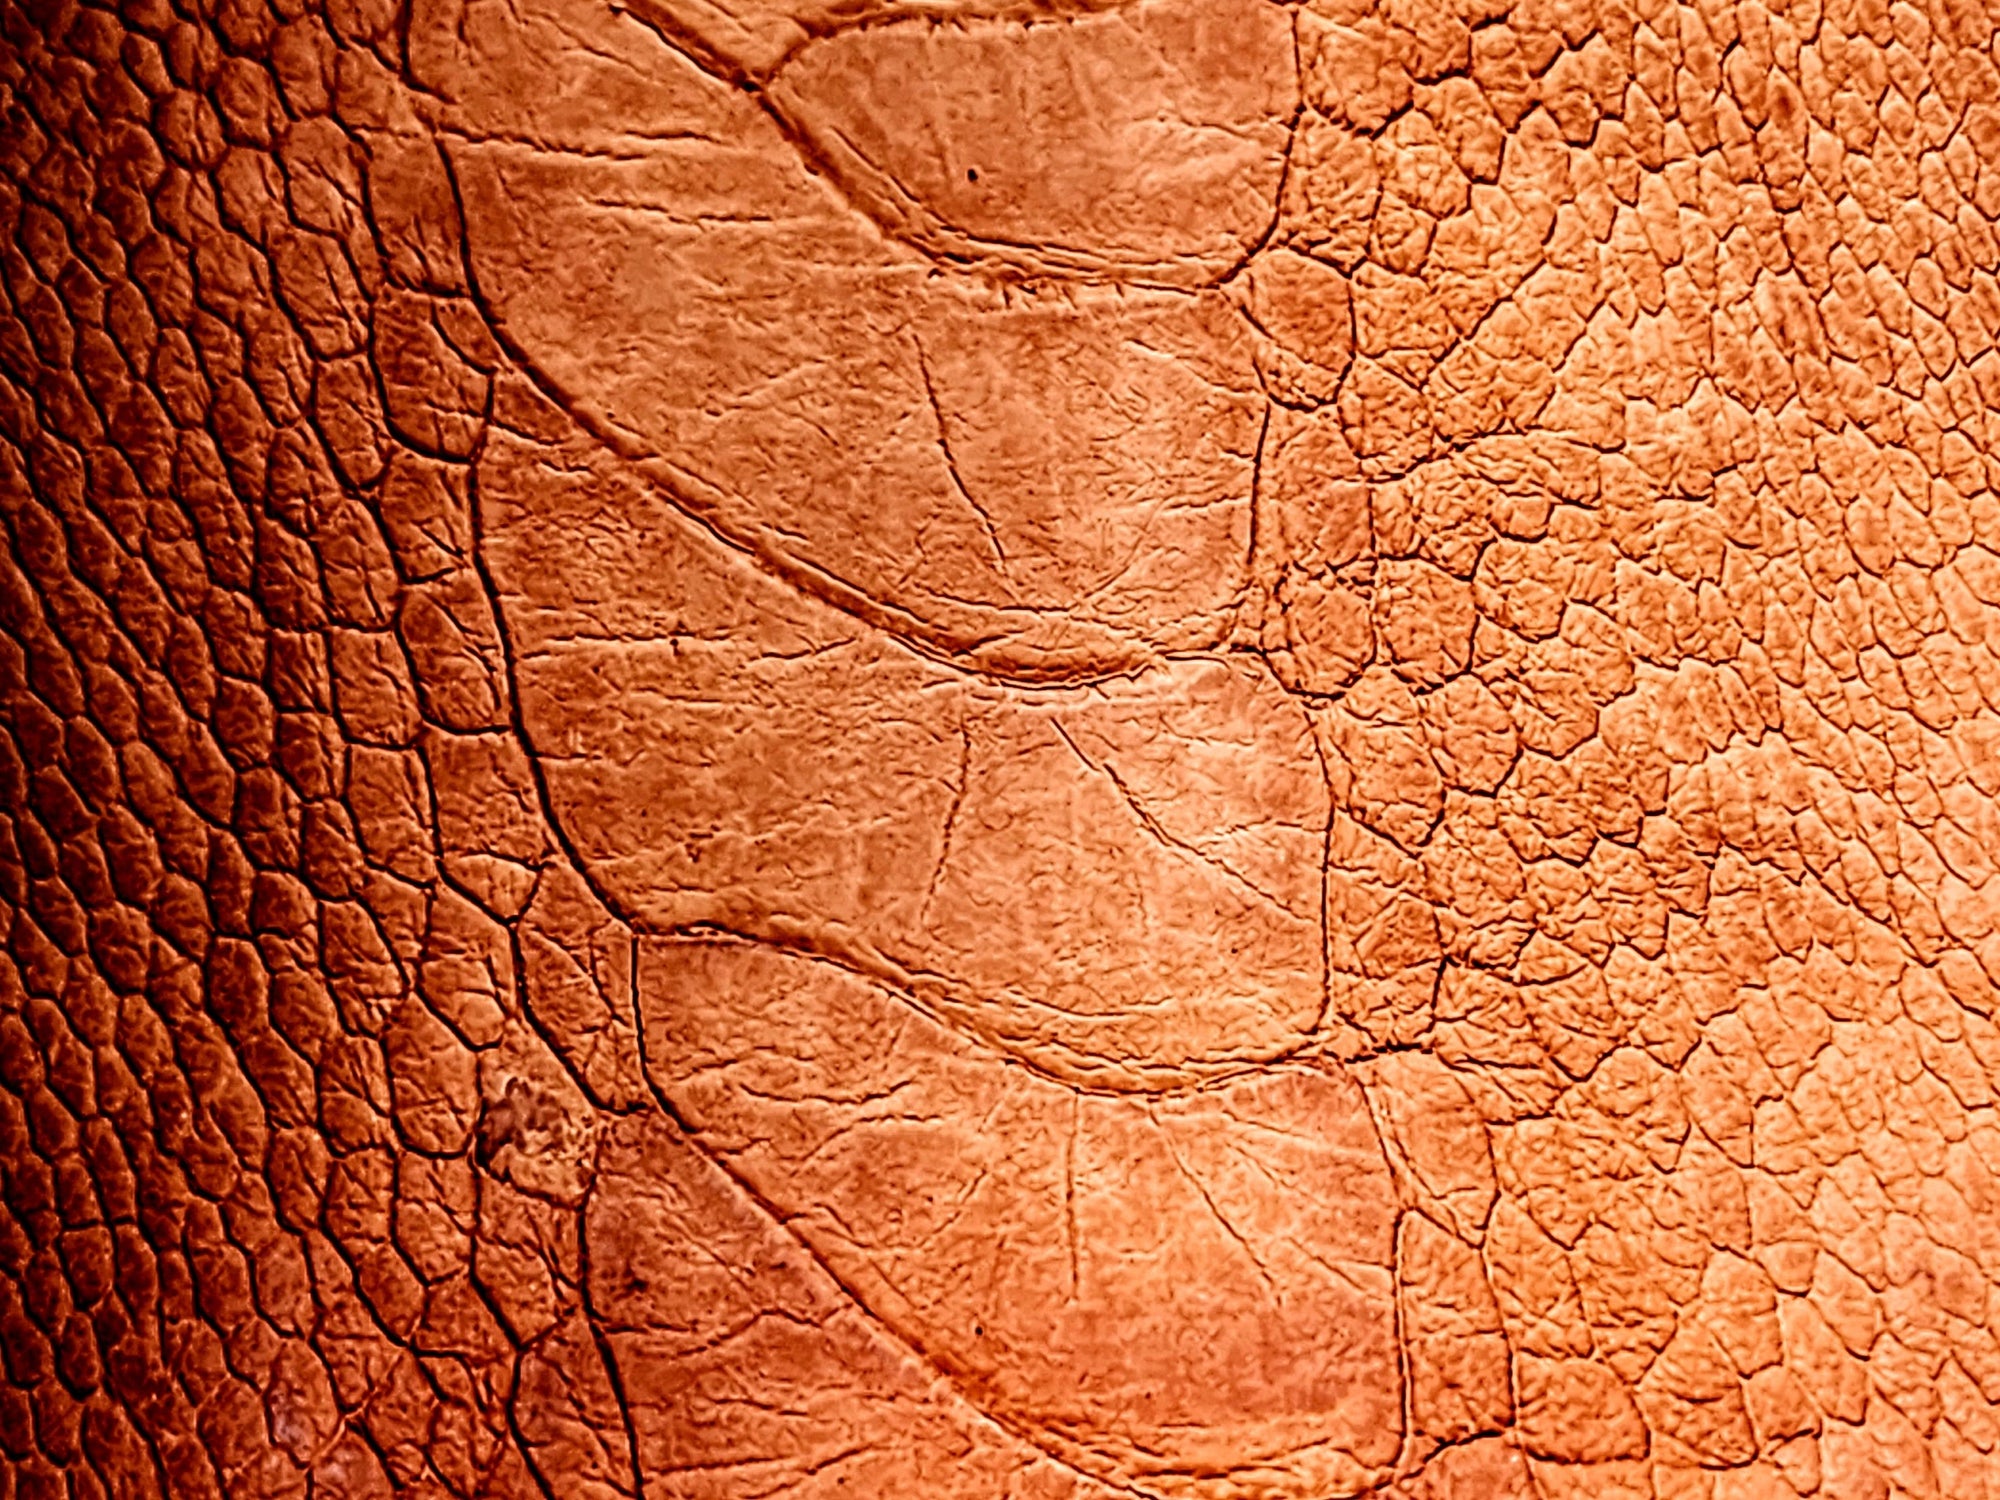  Close-up of exquisite tan ostrich leg leather, showcasing its unique texture and natural beauty.